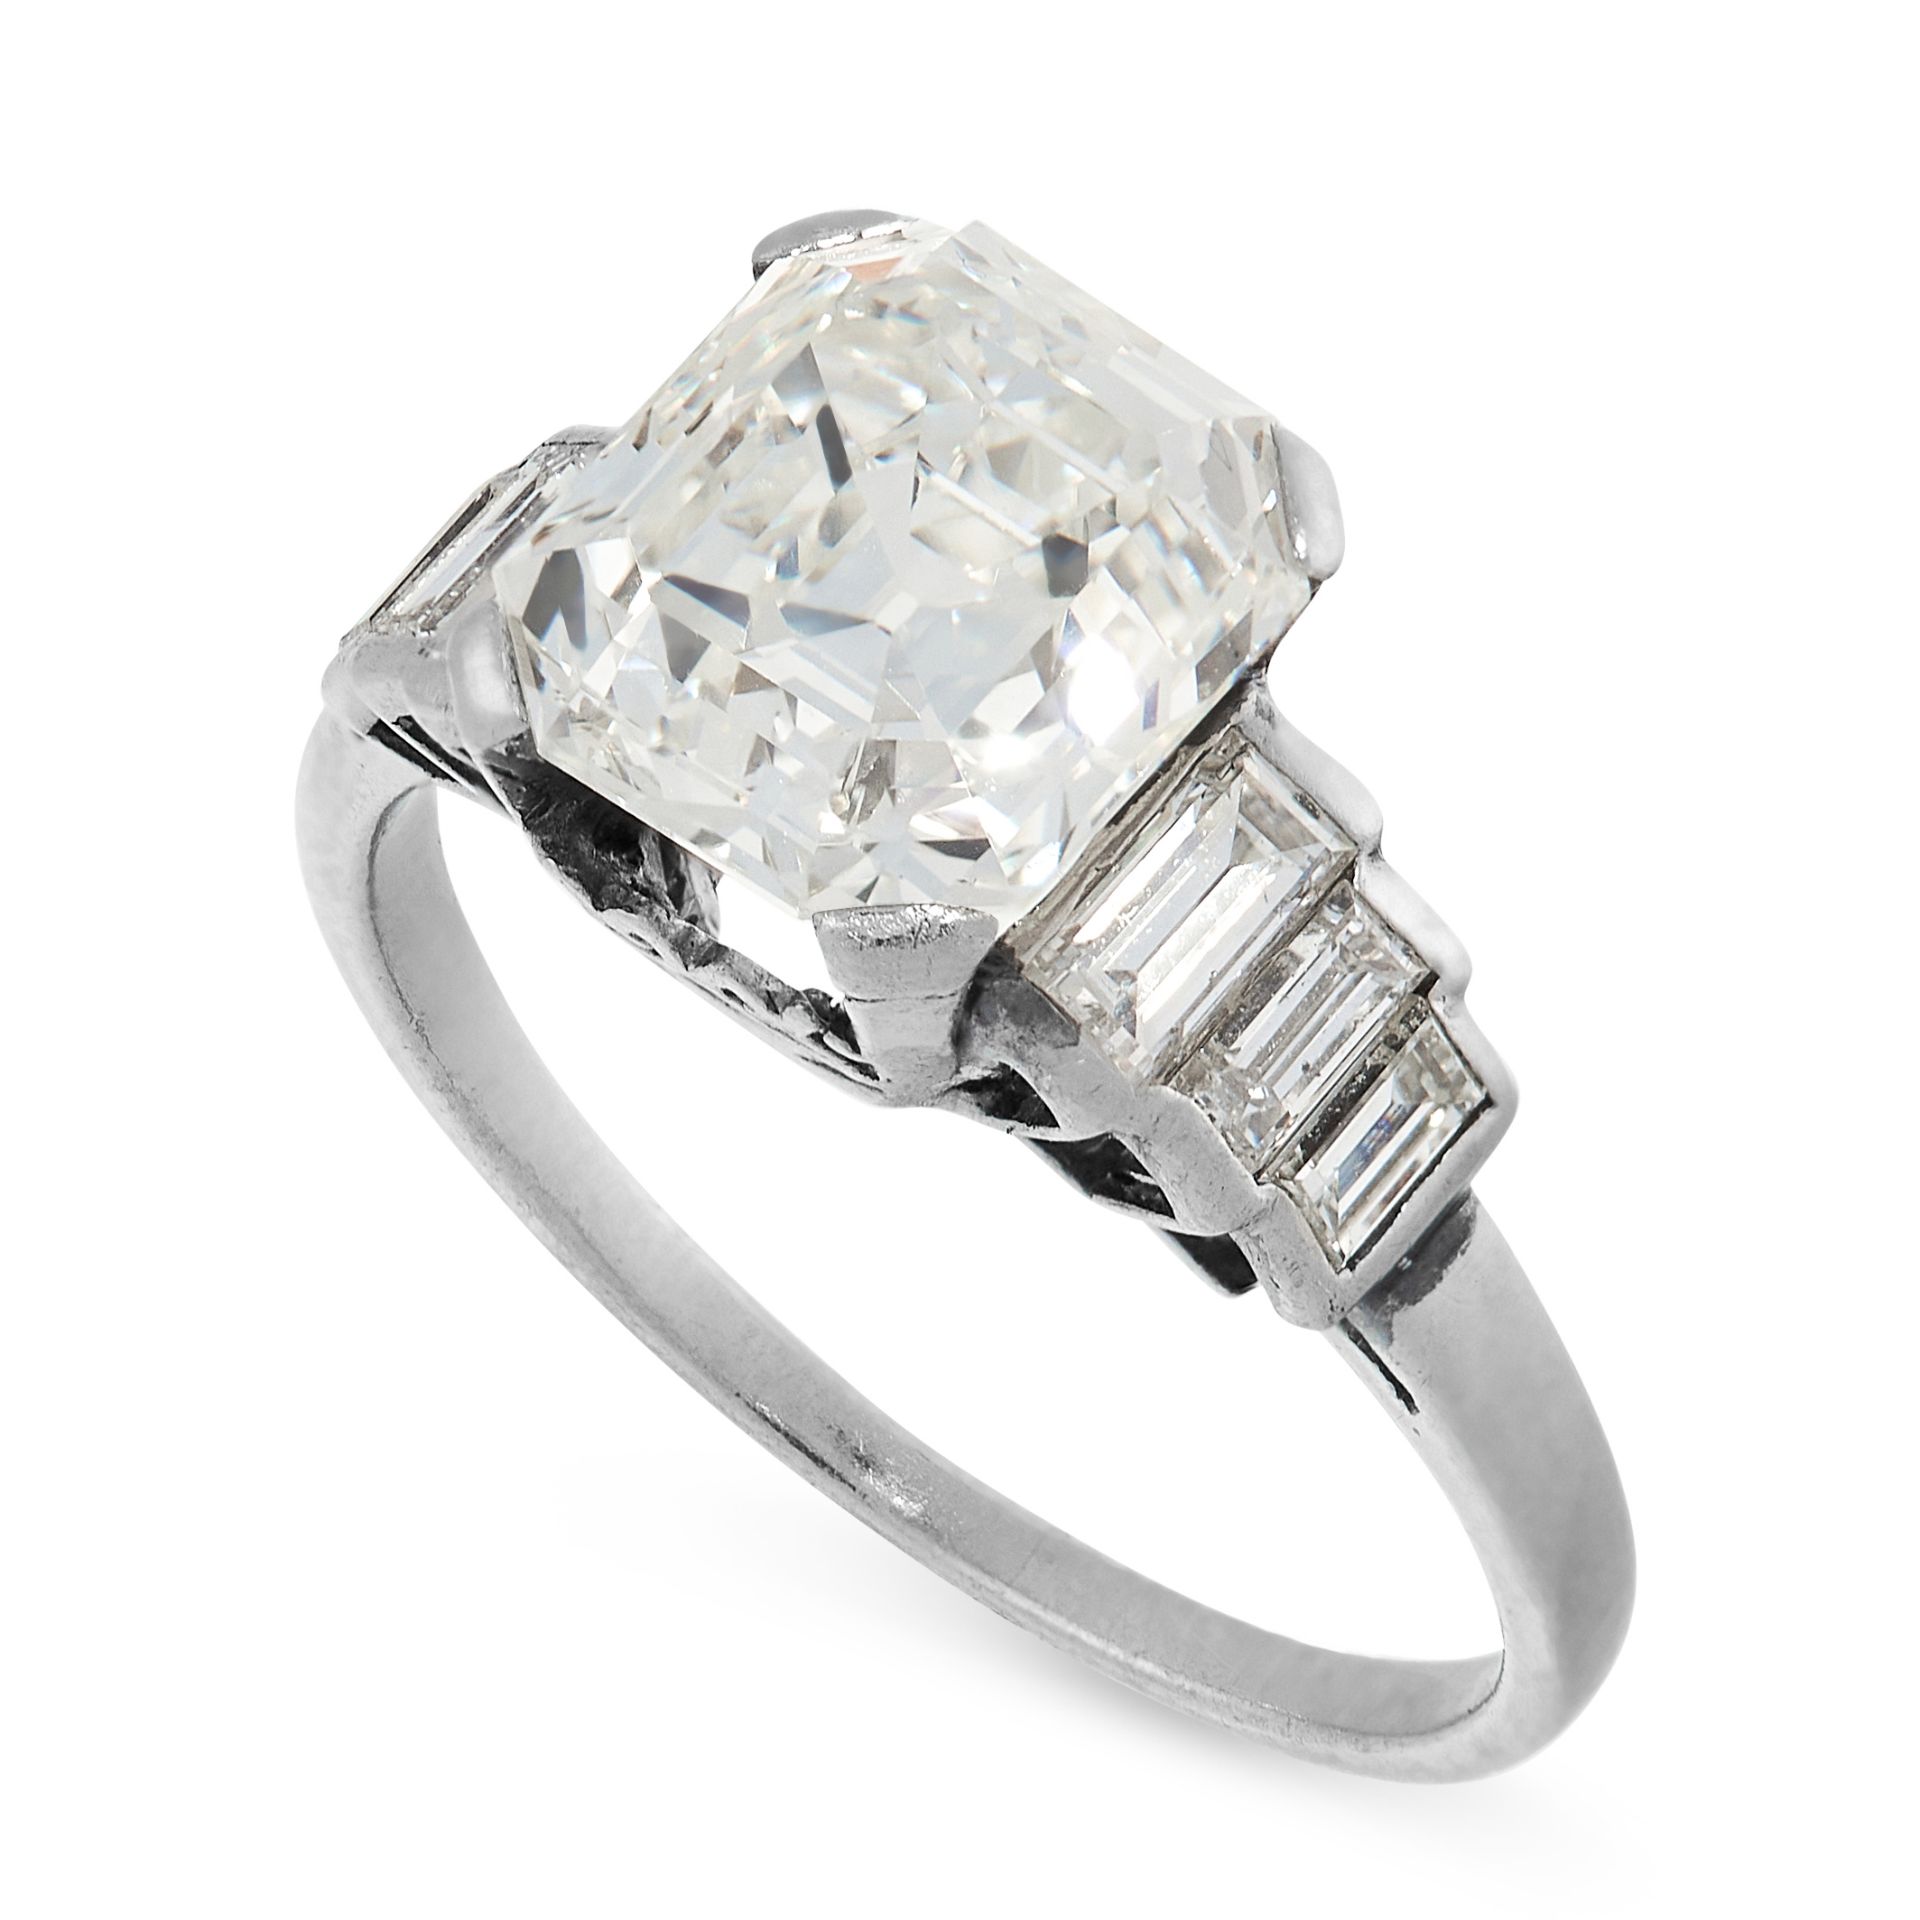 AN ART DECO SOLITAIRE DIAMOND RING, EARLY 20TH CENTURY set with a central asscher cut diamond - Image 2 of 2